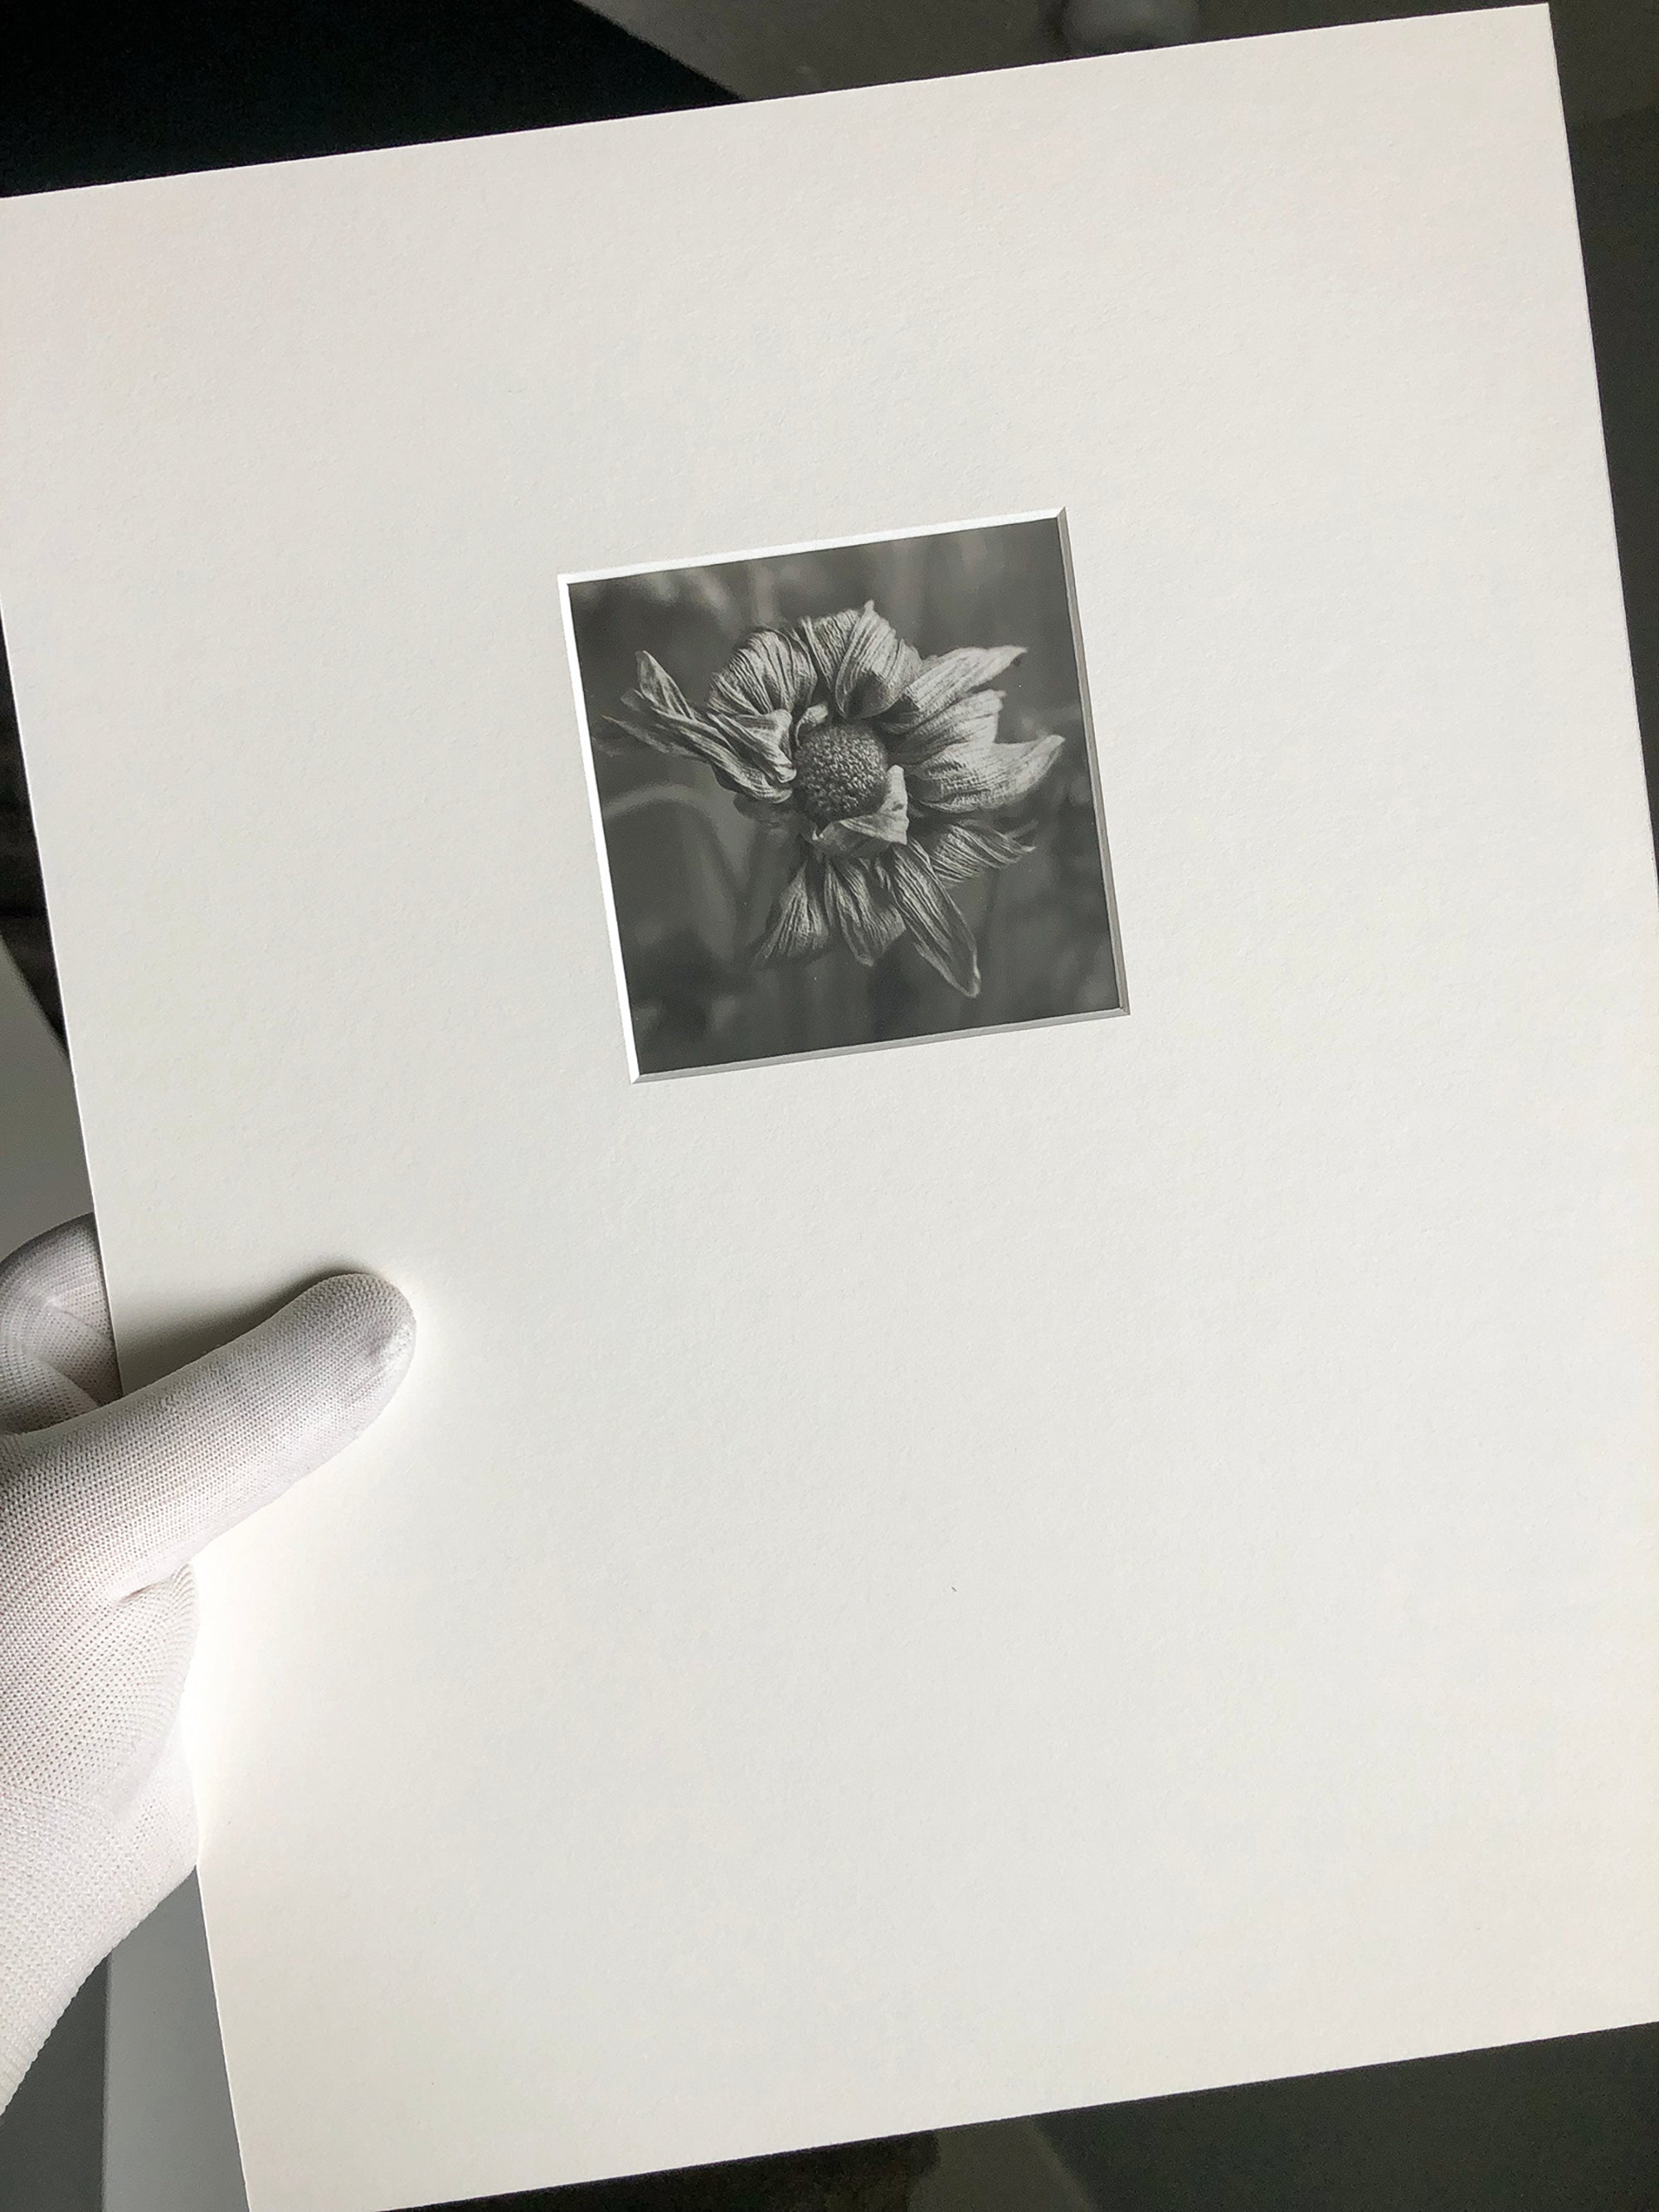 This still life photograph of a dead flower is printed on Ilford warm tone gelatin silver paper at 3.5 inches square. It's mounted and matted with an ivory overmat, and signed in pencil on the back of the mount.